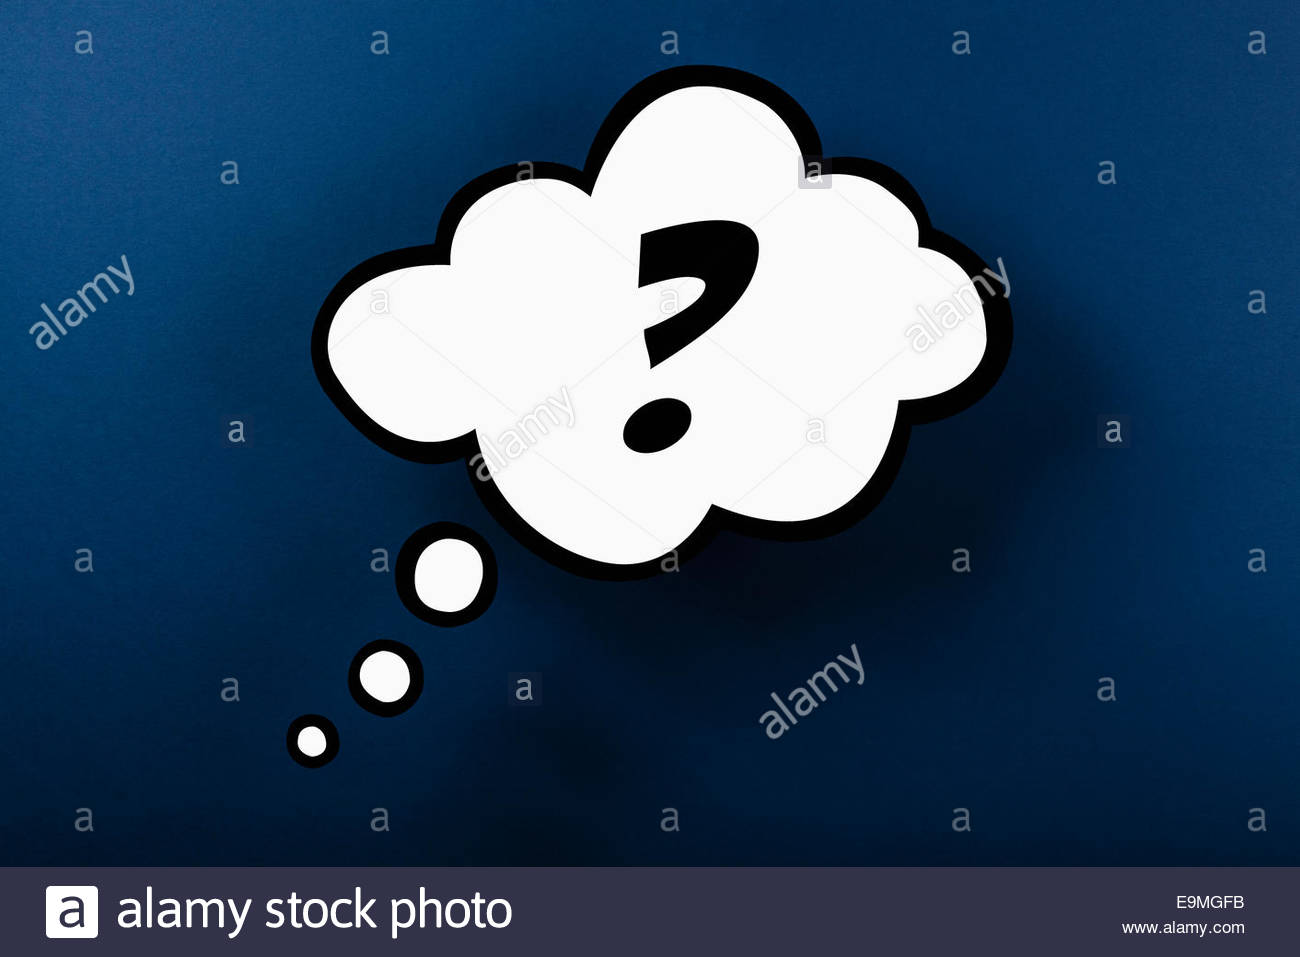 Question Mark Thought Bubble Against Blue Background Stock Photo